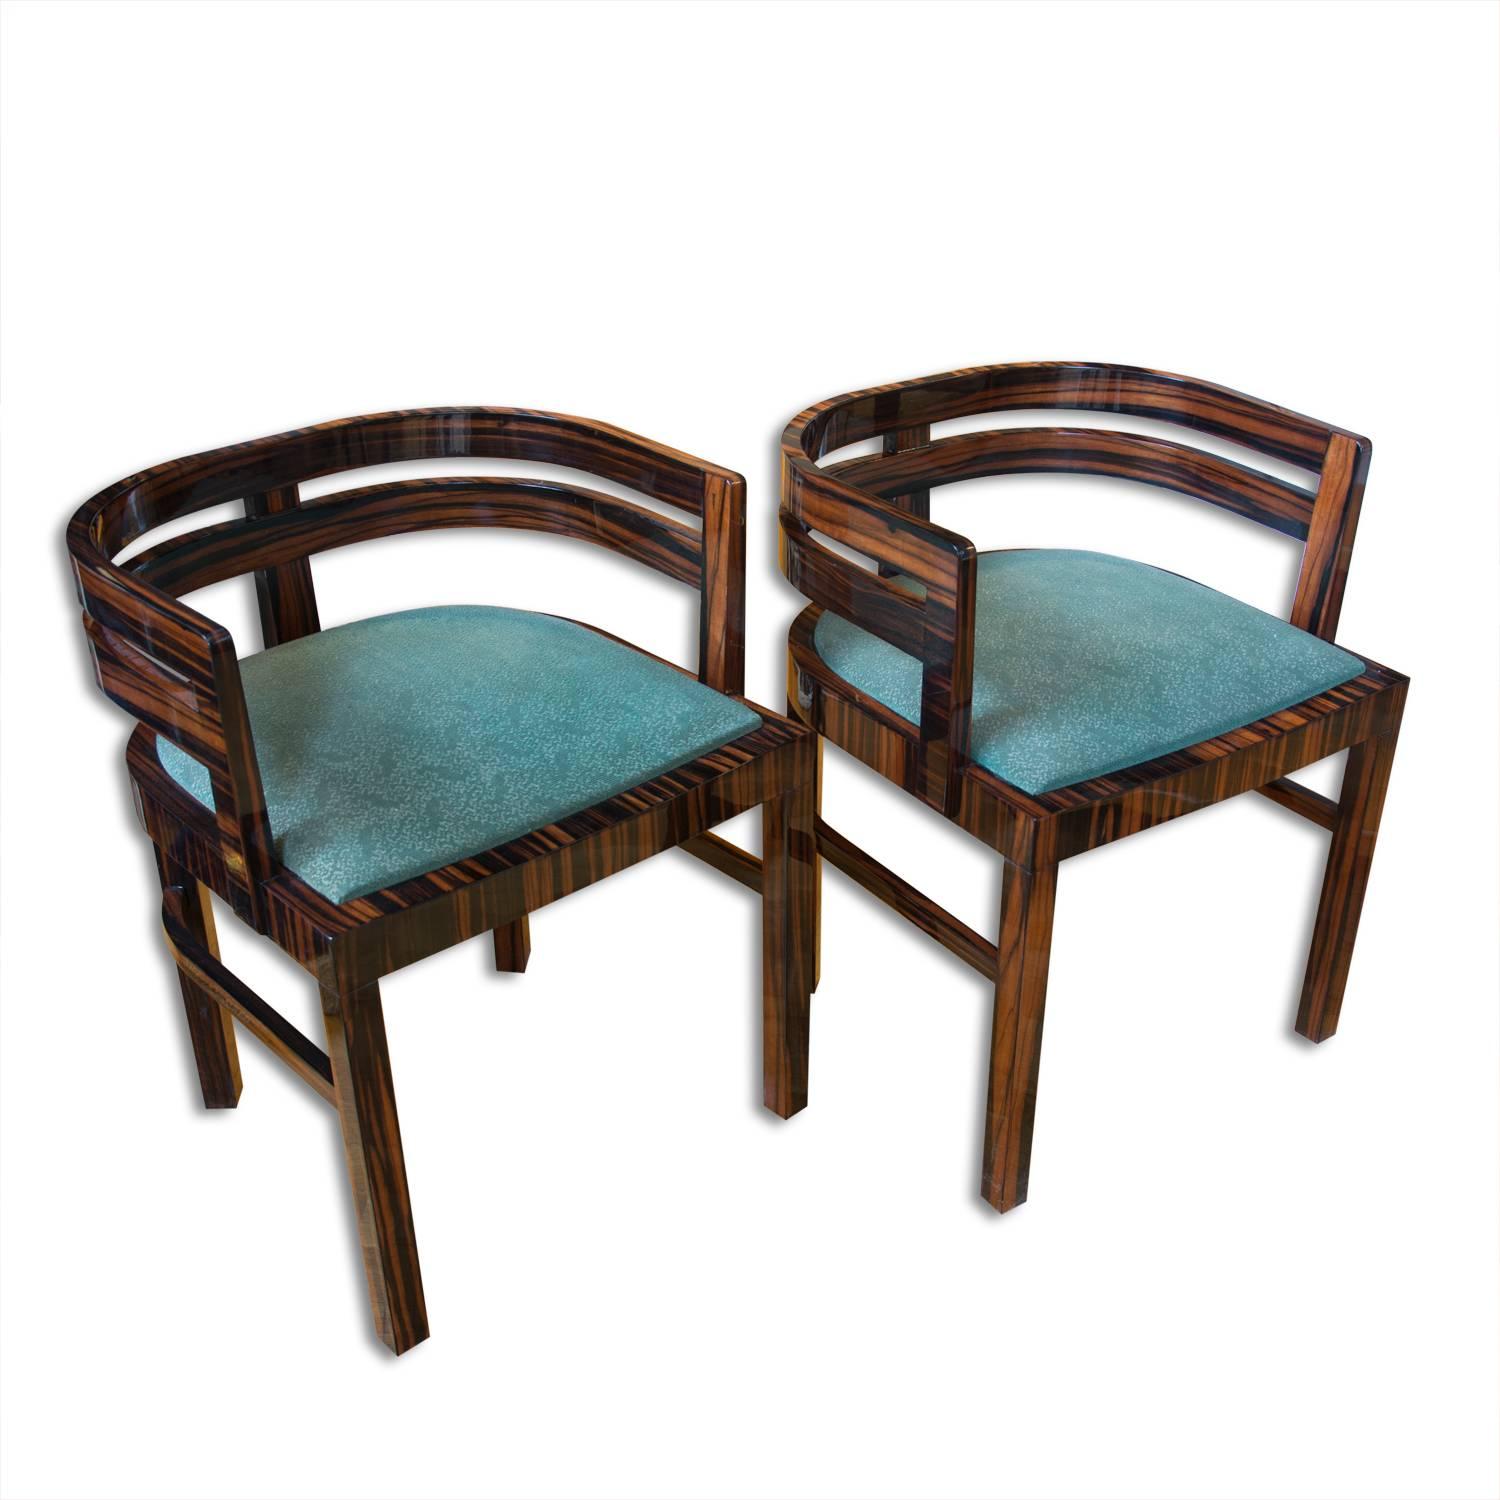 Functionalist macassar seating set inlcuded pair of armchairs and coffee table in macassar. It was designed and produced in the 1930s by the famous Prague architect Vlastimil Brozek. It features a regular shaped typical for Functionalism in the